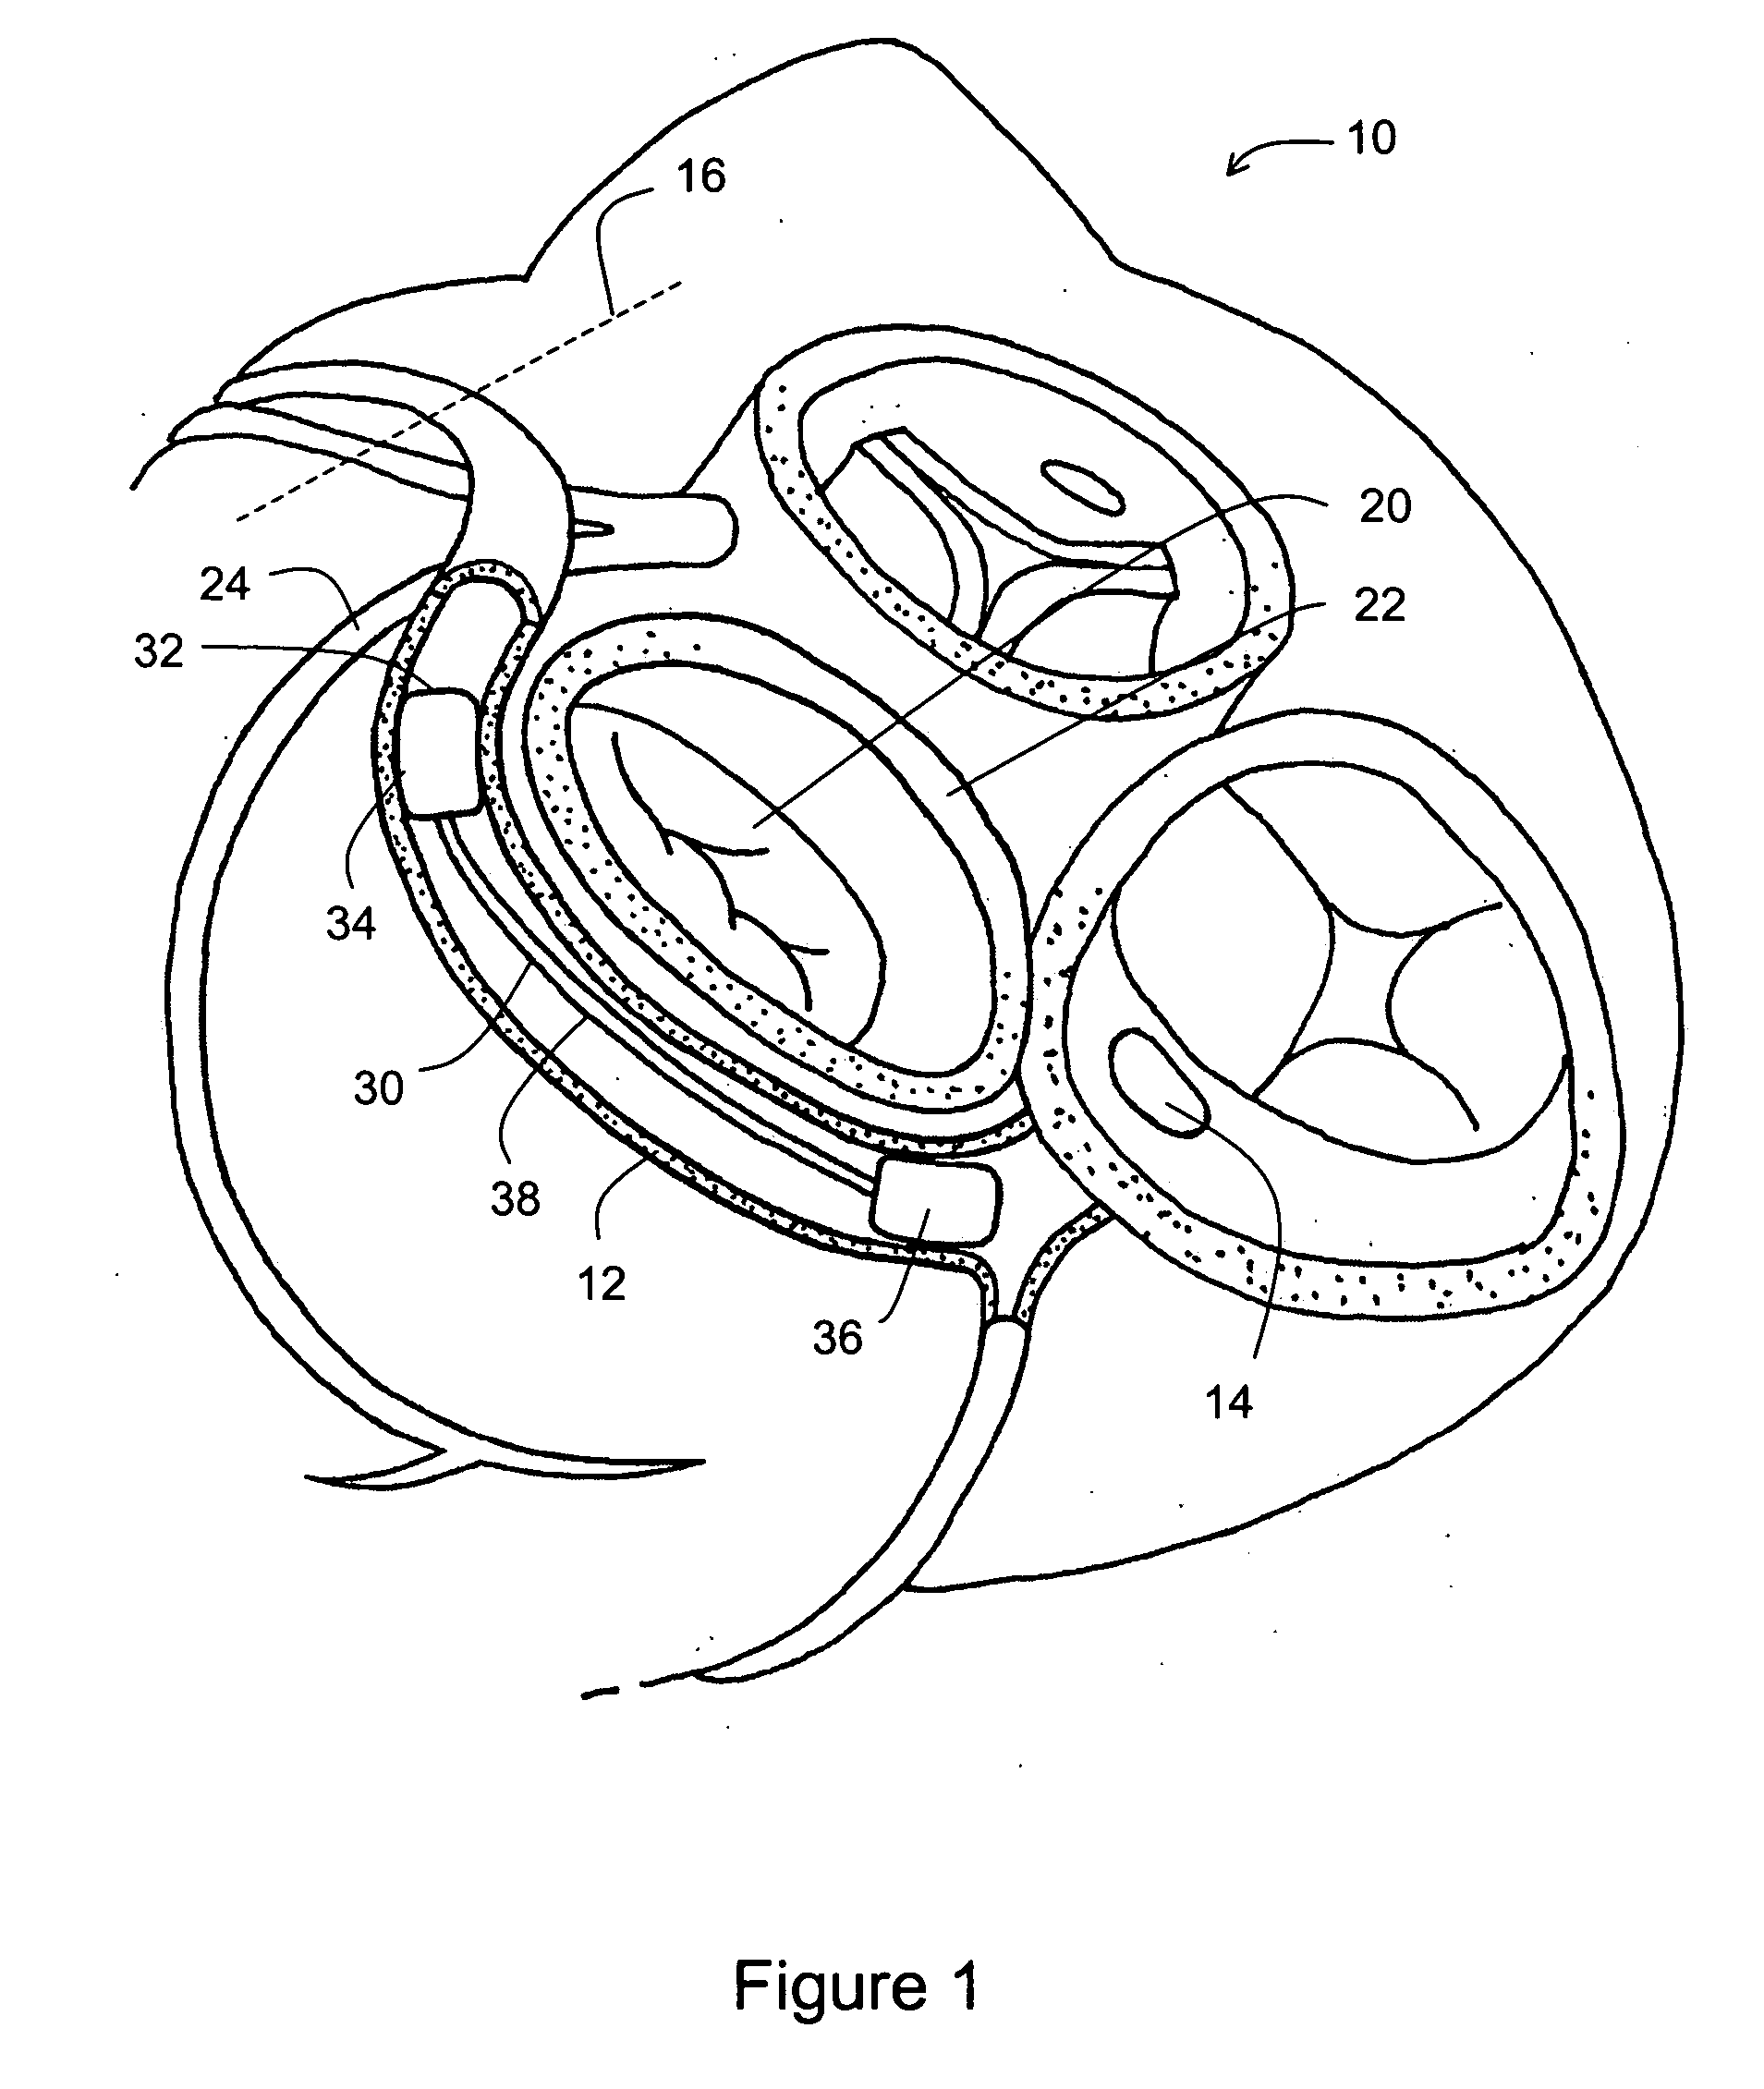 Tissue shaping device with integral connector and crimp